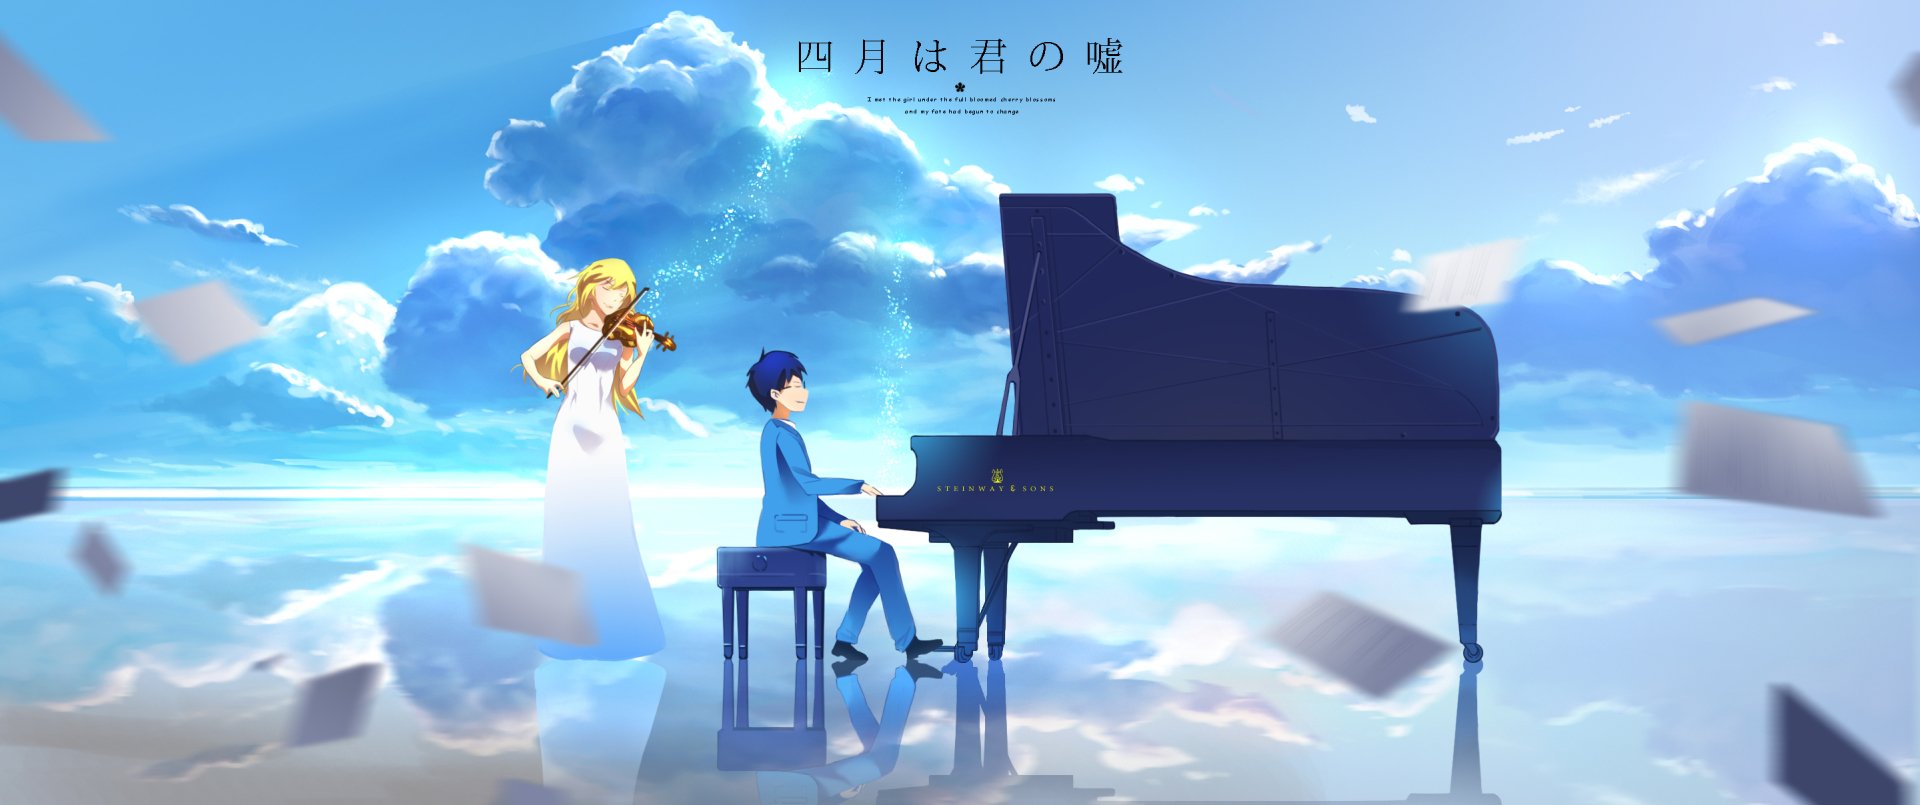 Your Lie In April Pc Background - HD Wallpaper 